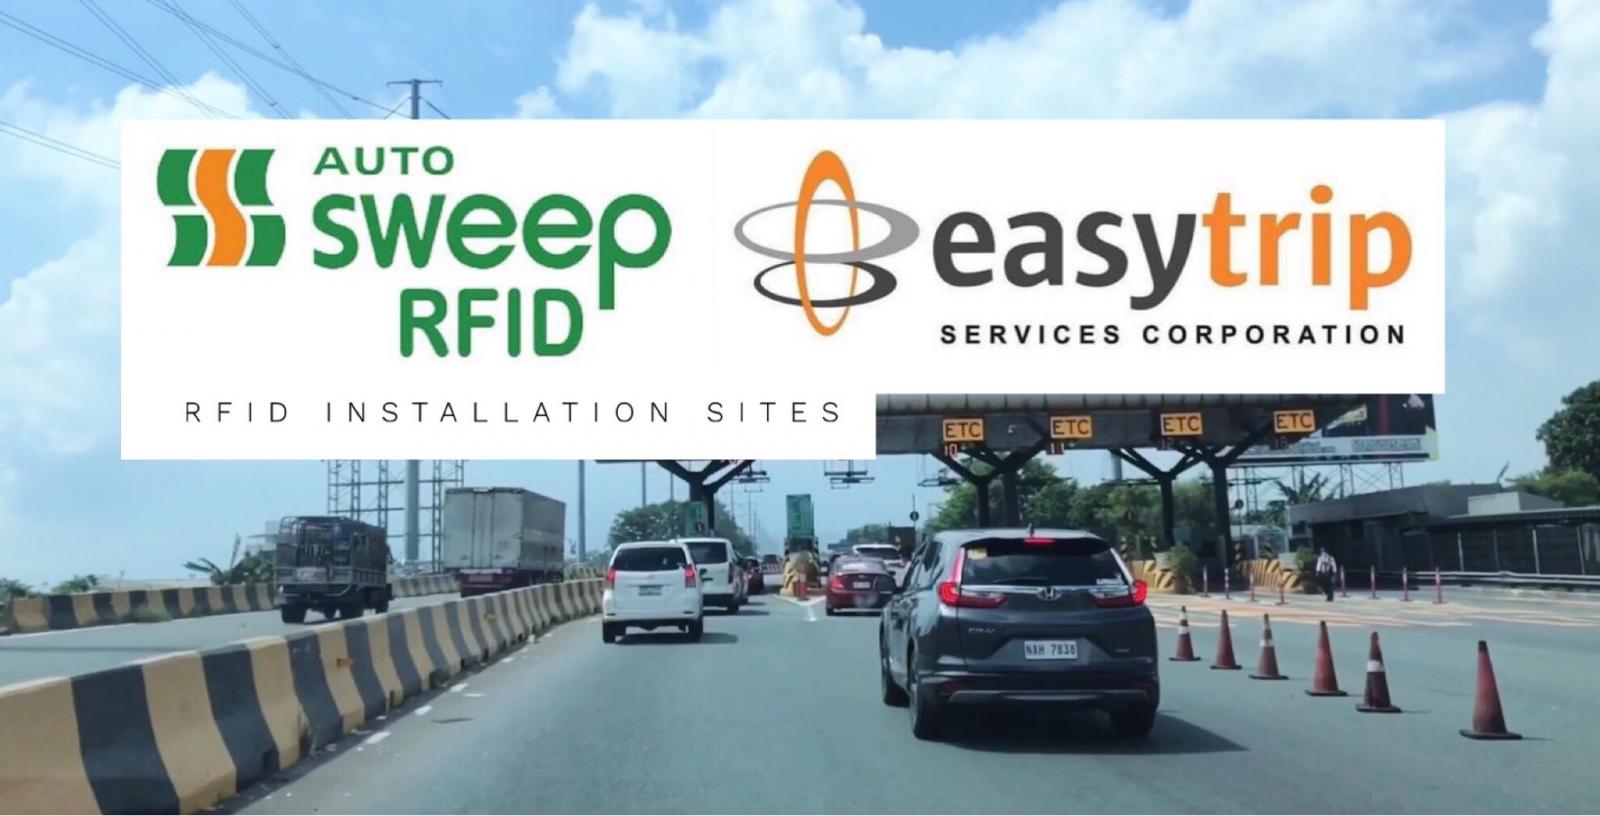 Autosweep vs Easytrip: Which System Should You Subscribe To?